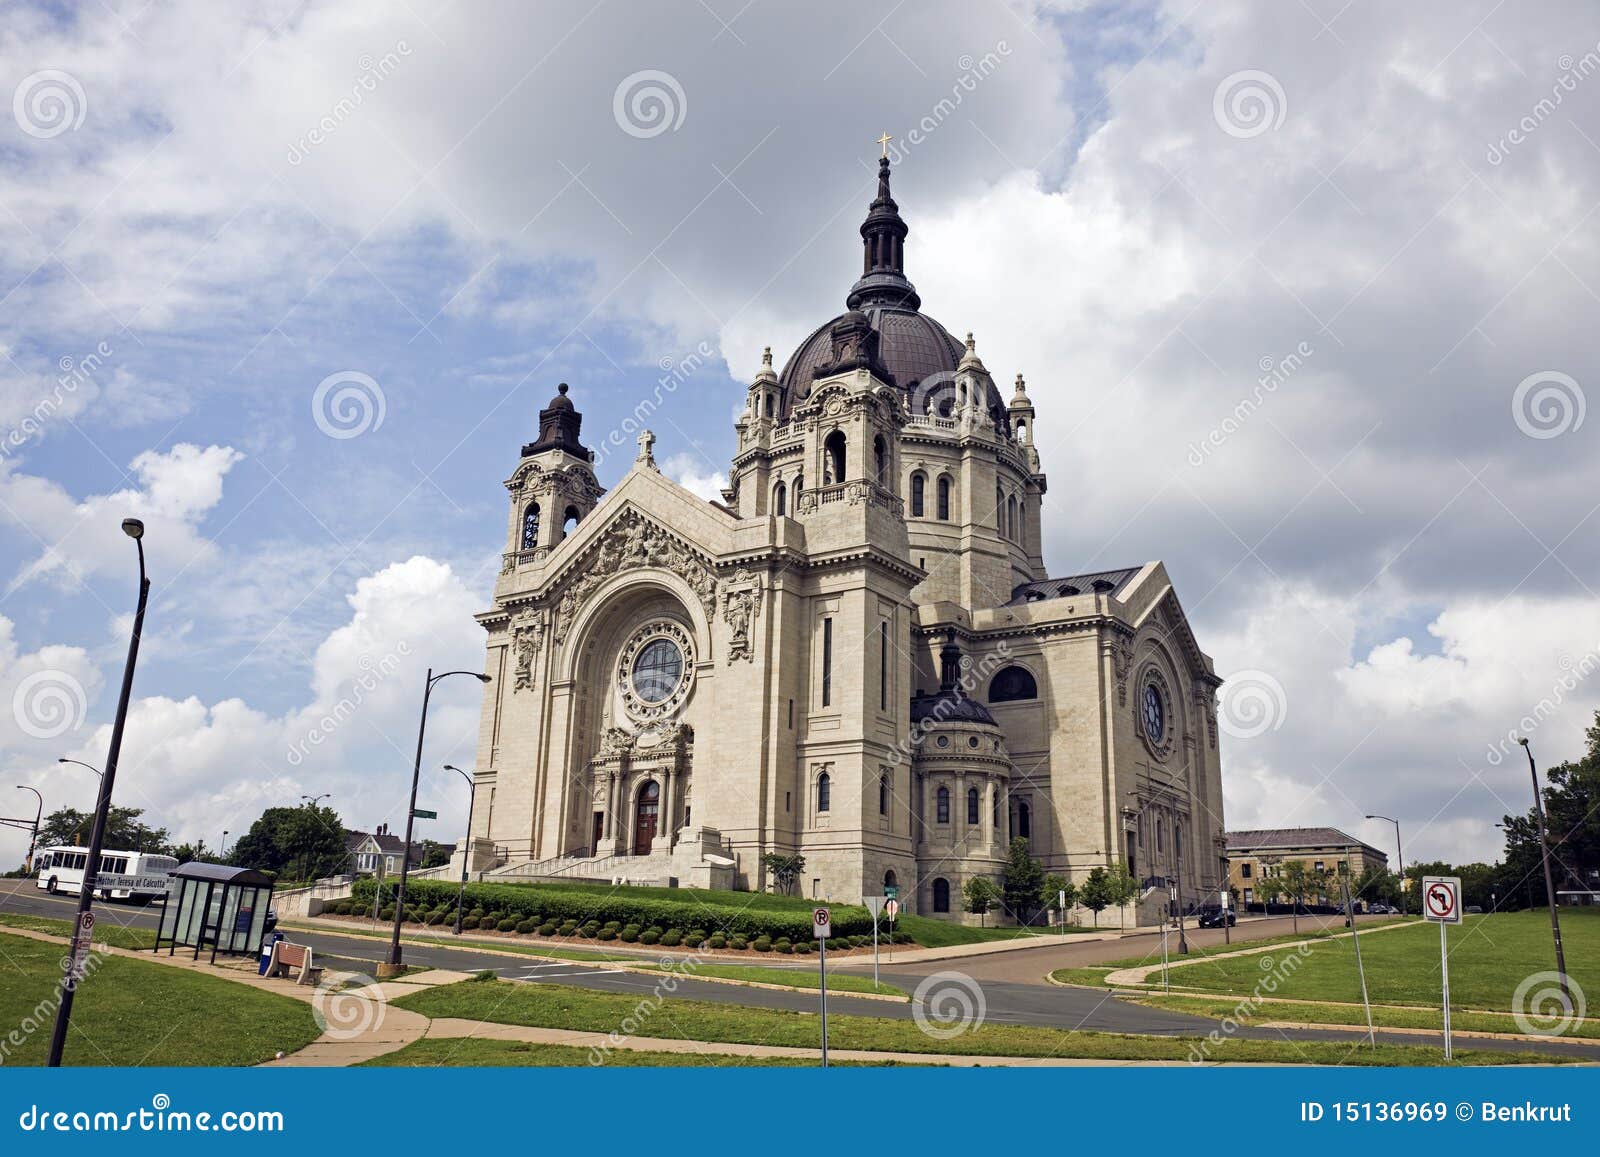 cathedral in st. paul, minnesota